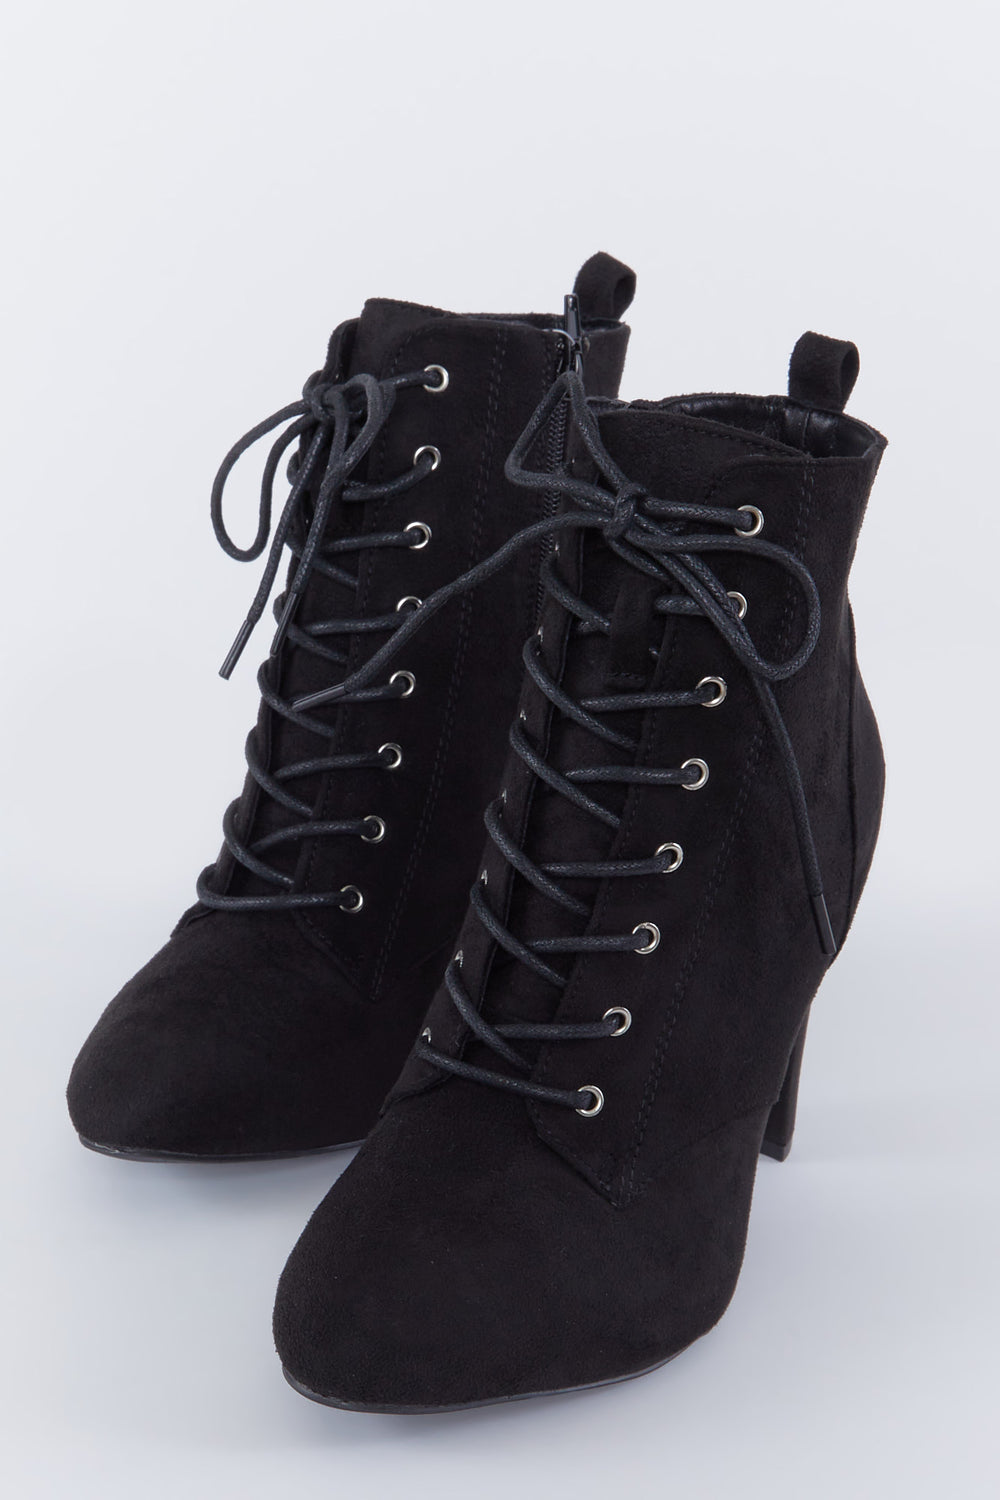 Faux-Suede Lace-Up High Heel Boot Black